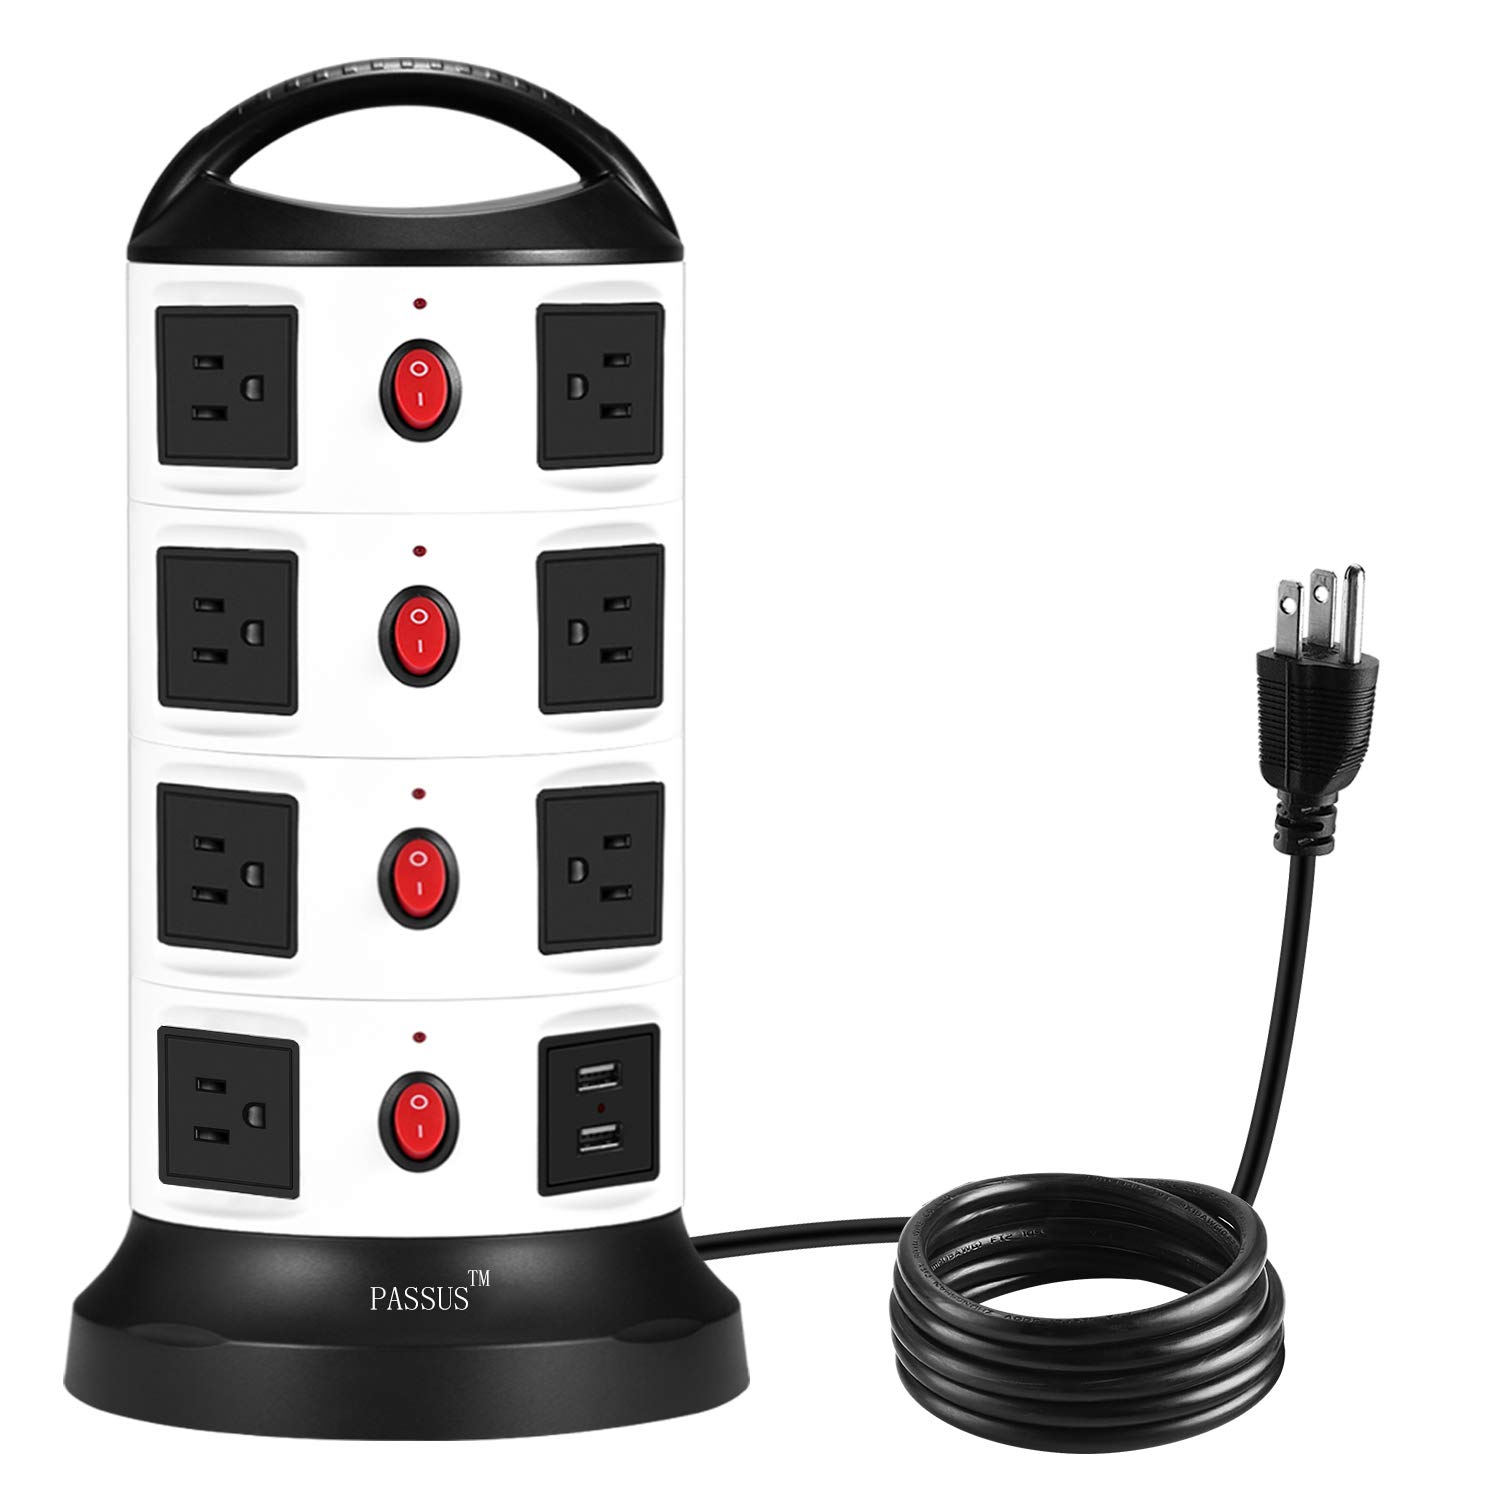 Book Cover Tower Surge Protector Power Strip,Universal Charger with 15 Outlets and 2-Port USB,5.9 Feet Cord Wire, Overload Protection and Safety Door Outlet for PC and Mobile Electronic Device